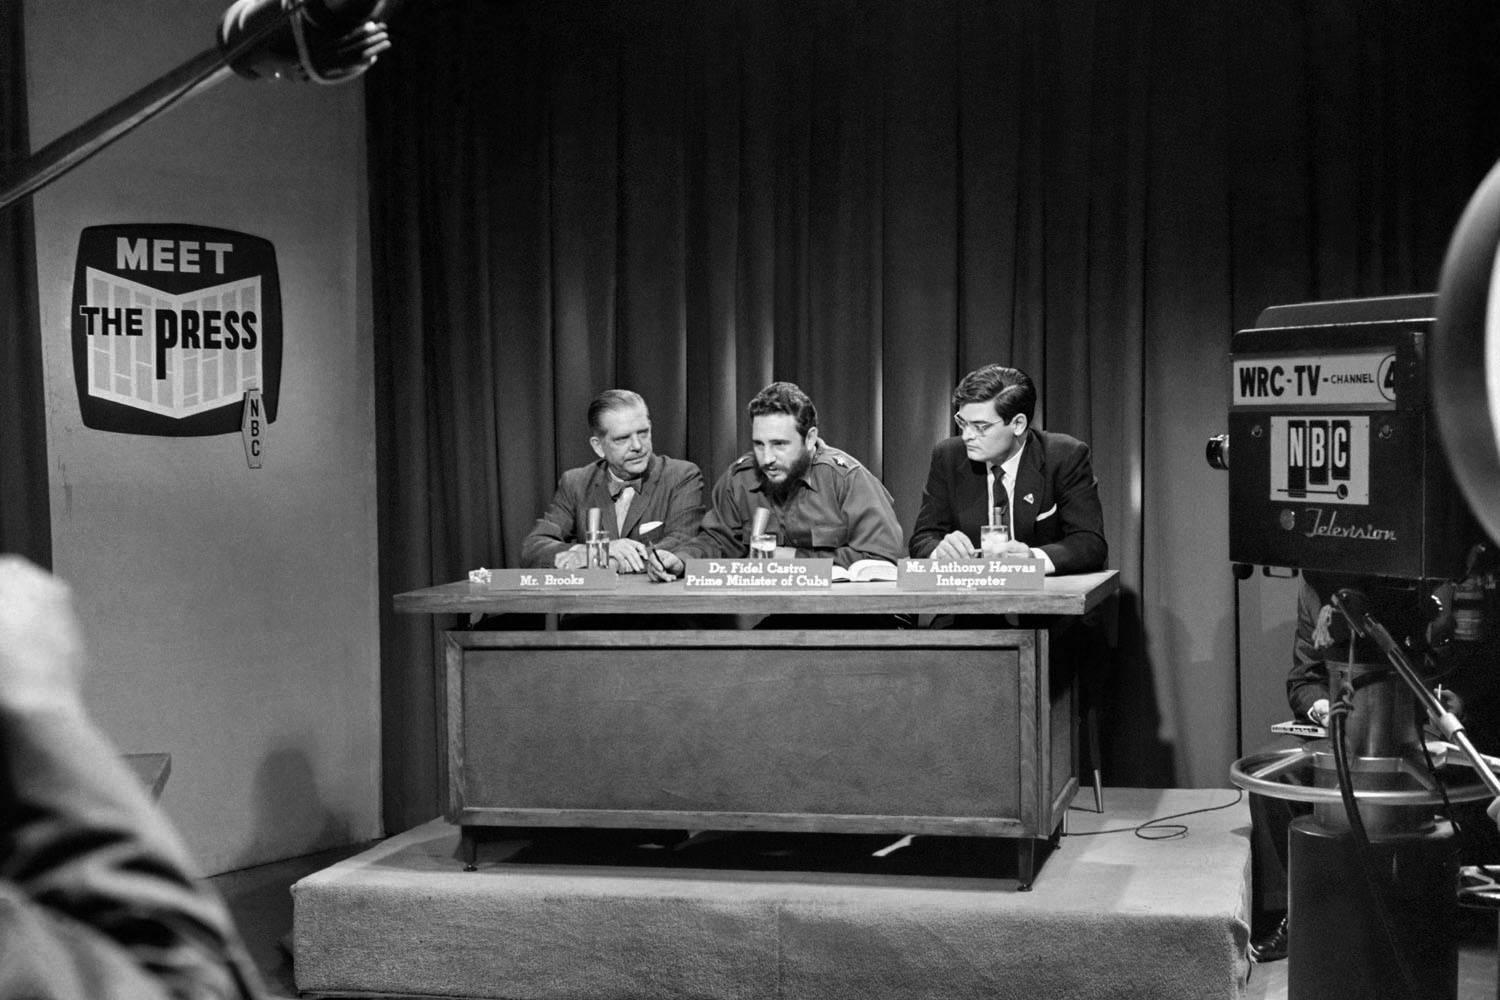 Alberto Korda Black and White Photograph - Fidel Castro  answering questions from journalists on Meet the Press, Washington